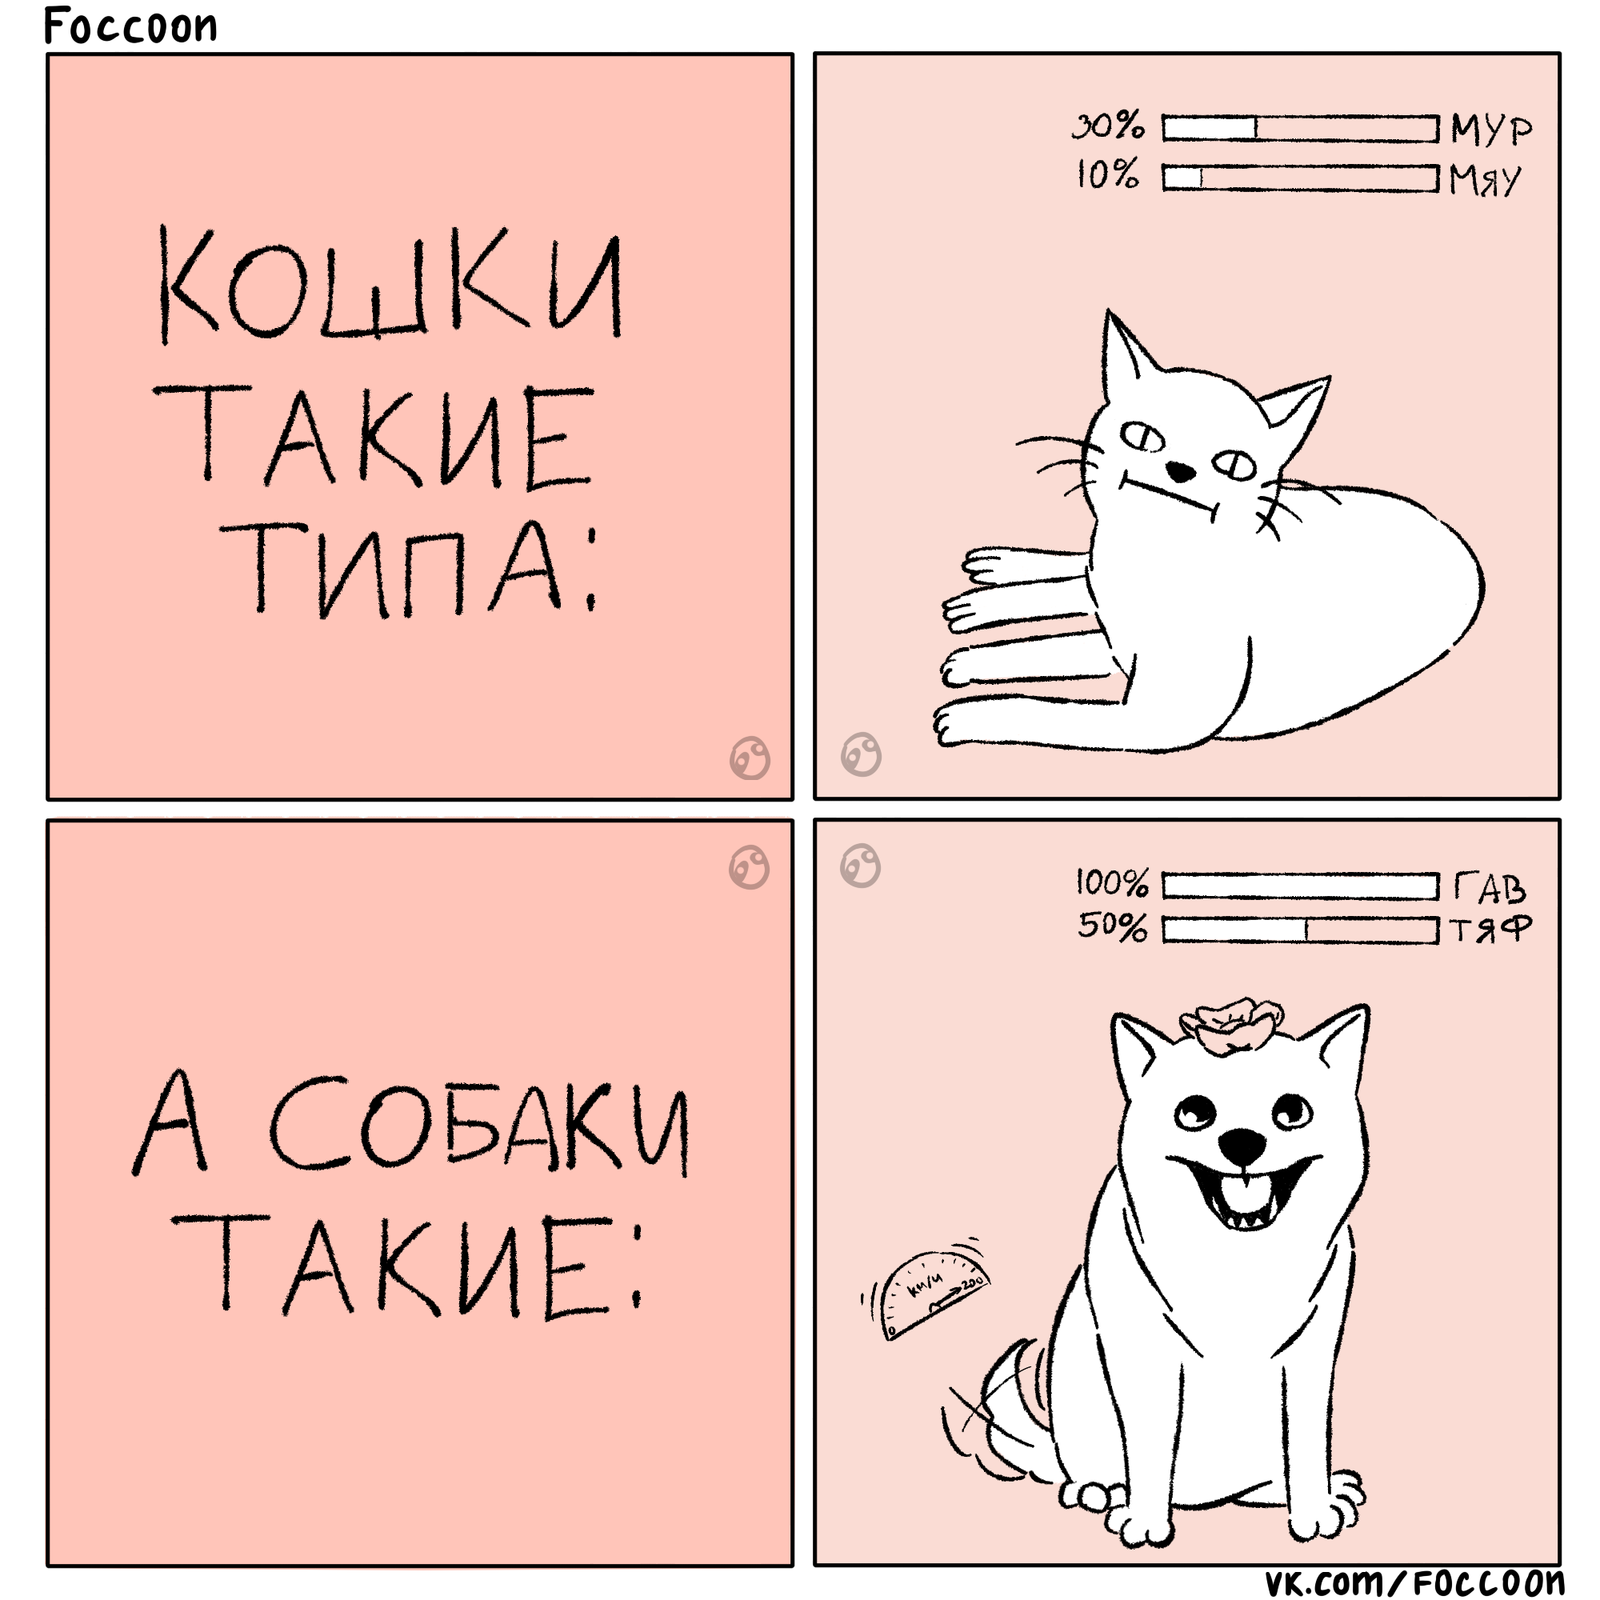 Cats/dogs - Animals, Milota, Comics, Cats and dogs together, Dog, cat, Foccoon, My